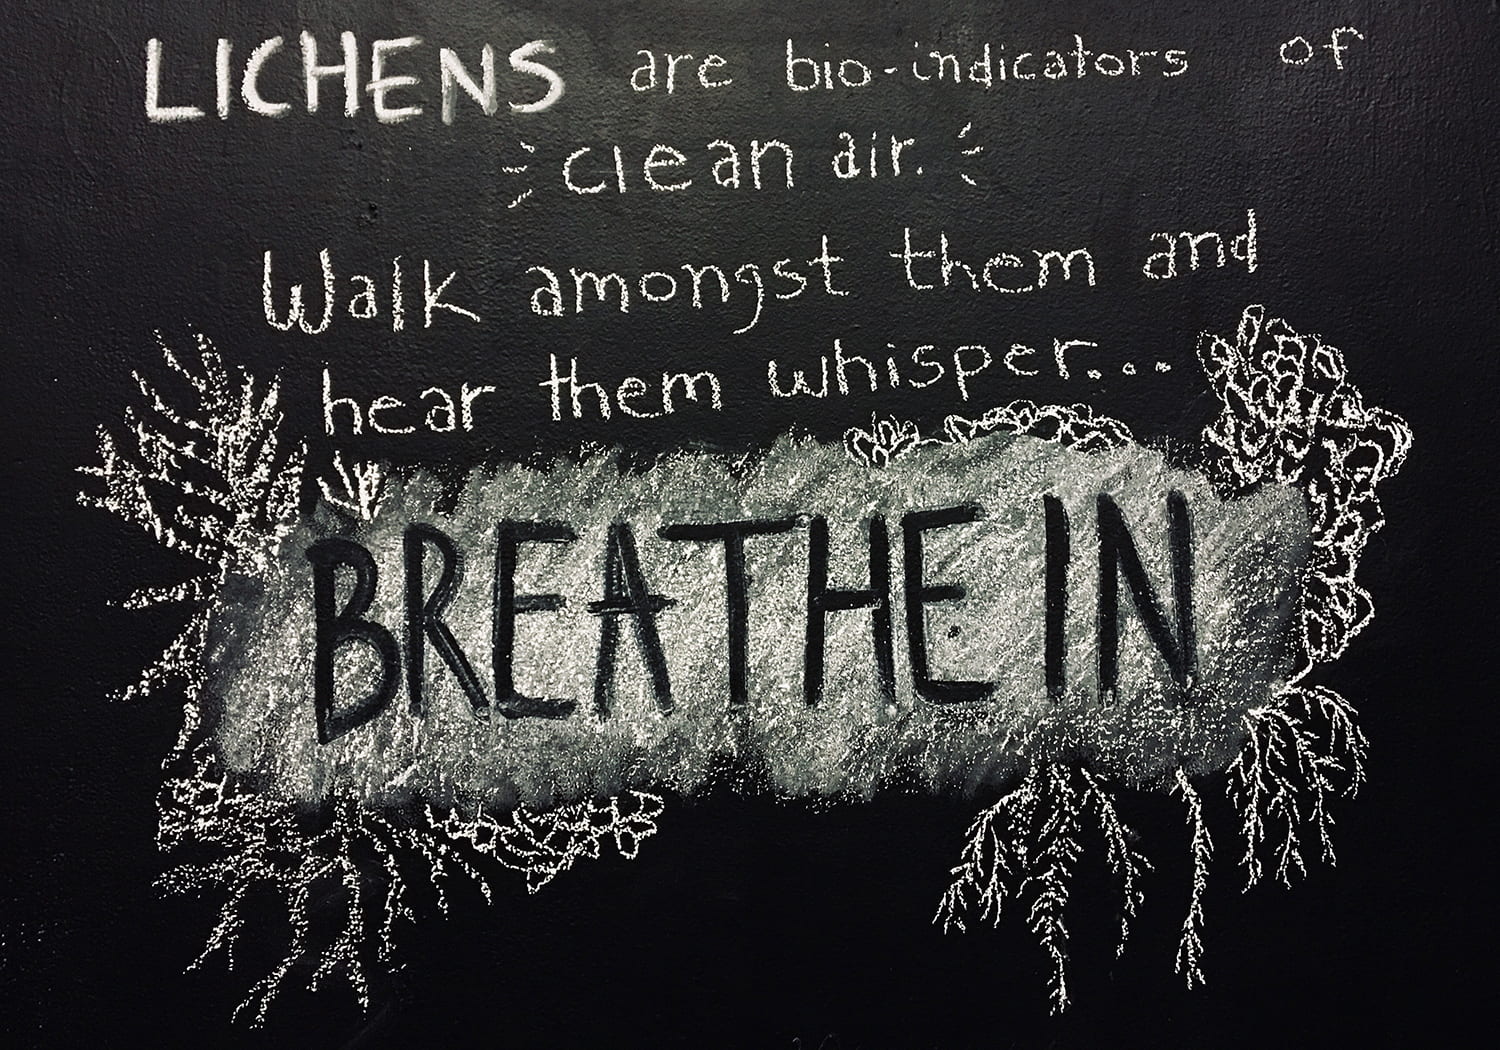 decorative words on a chalkboard: Lichens are bio-indicators of clean air. Walk amongst them and hear them whisper... Breathe in